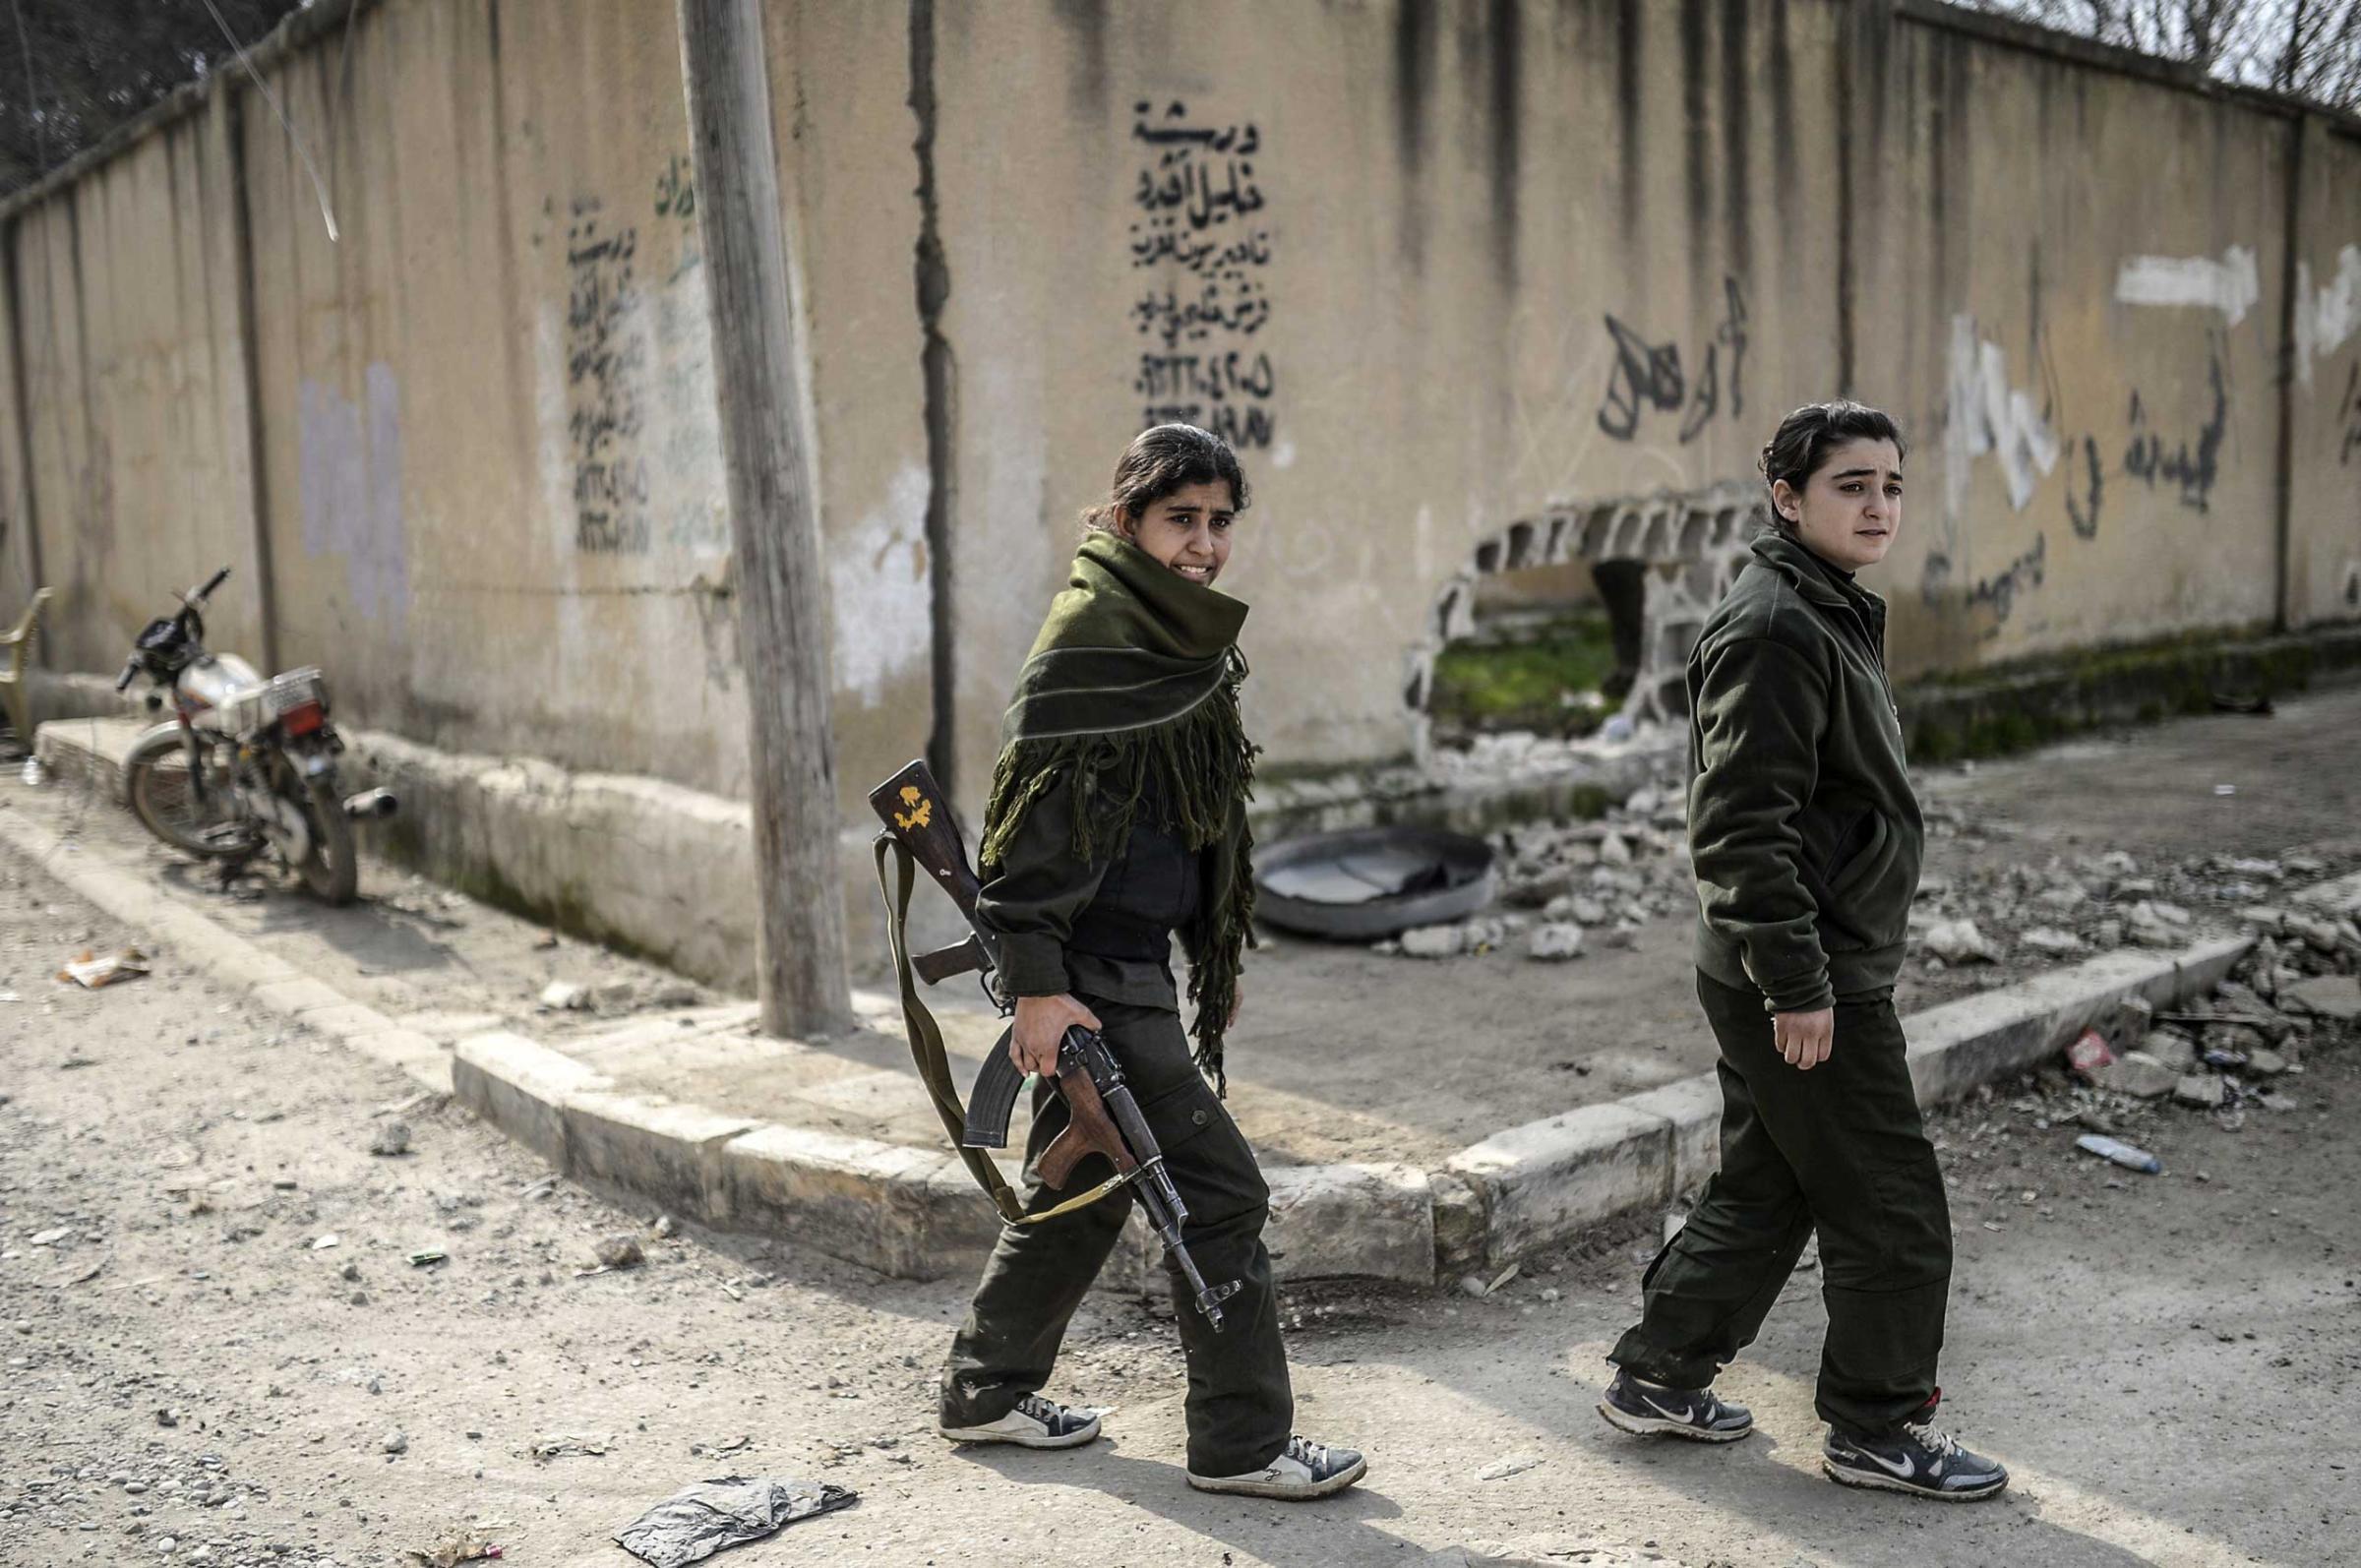 Kurdish fighters walk along a street in the center of the Syrian town of Kobani on Jan. 28, 2015.